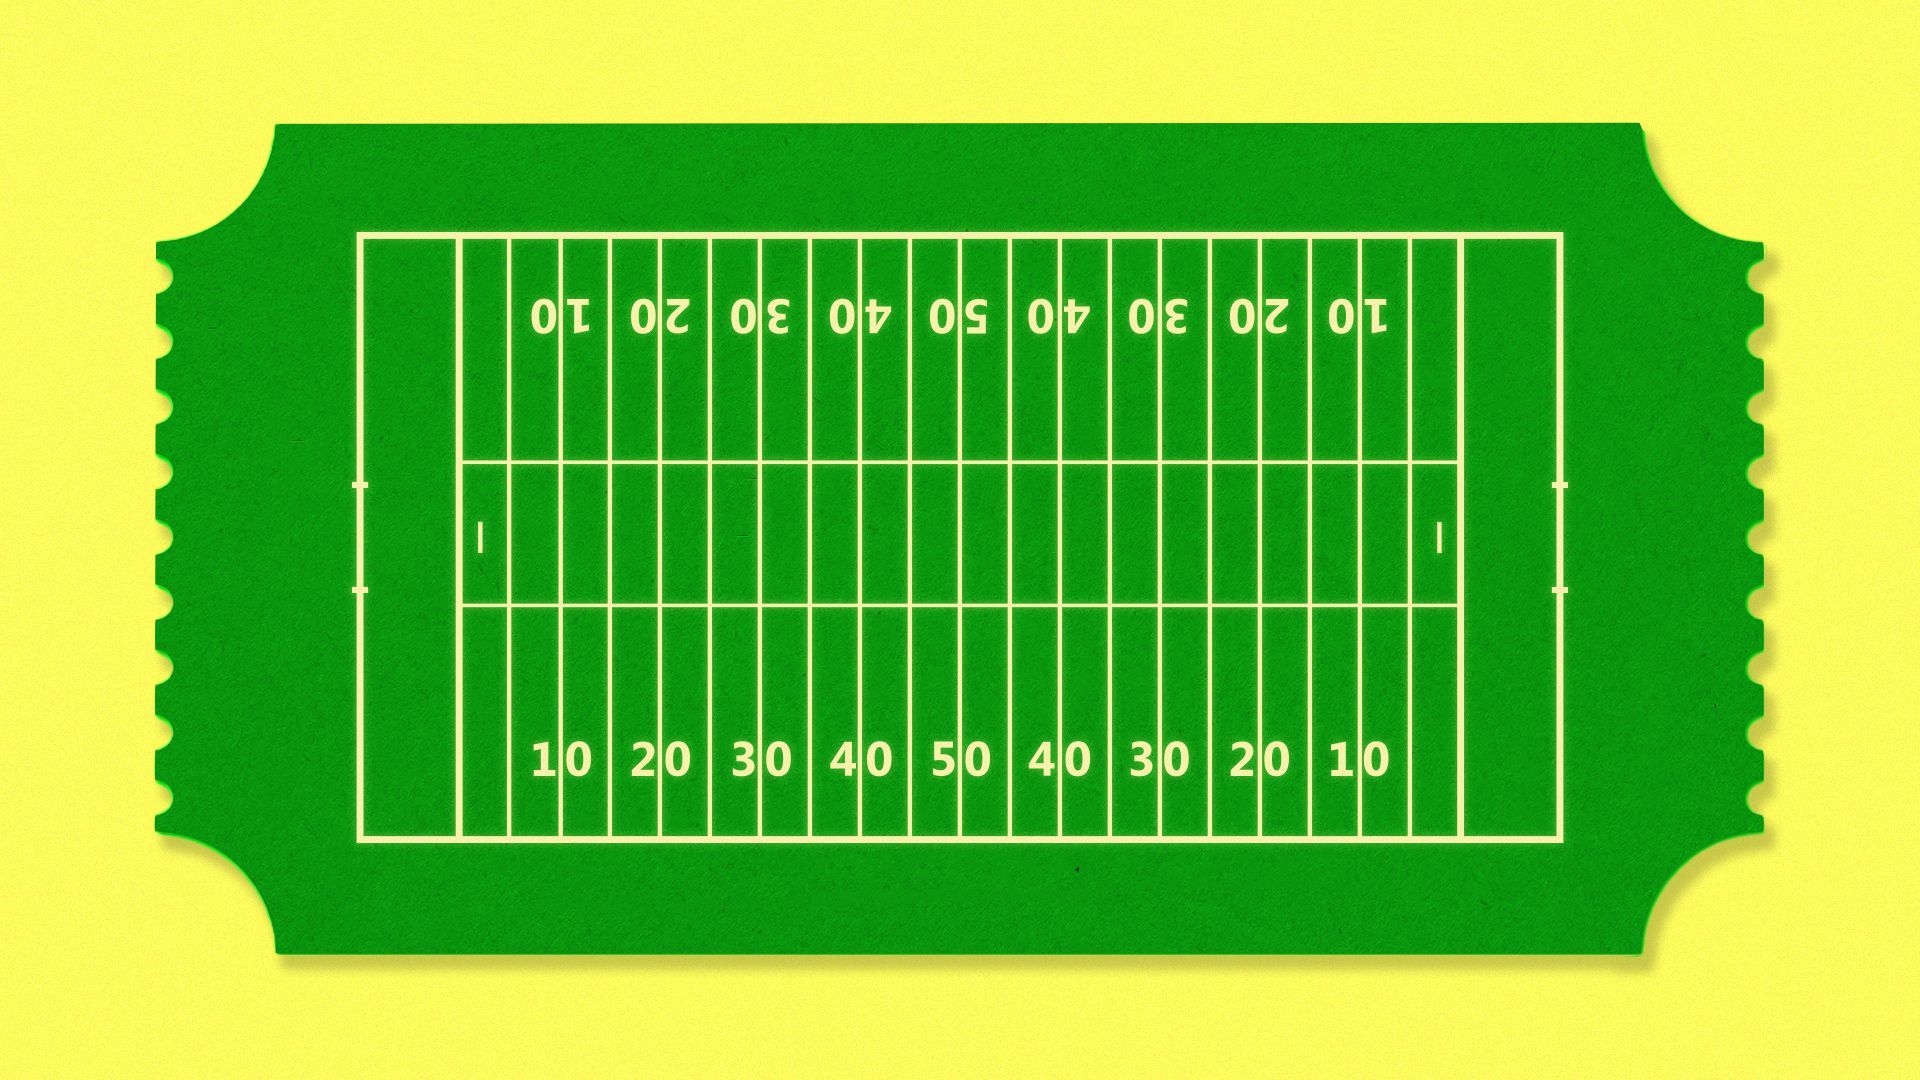 Illustration of a ticket that looks like a football field.